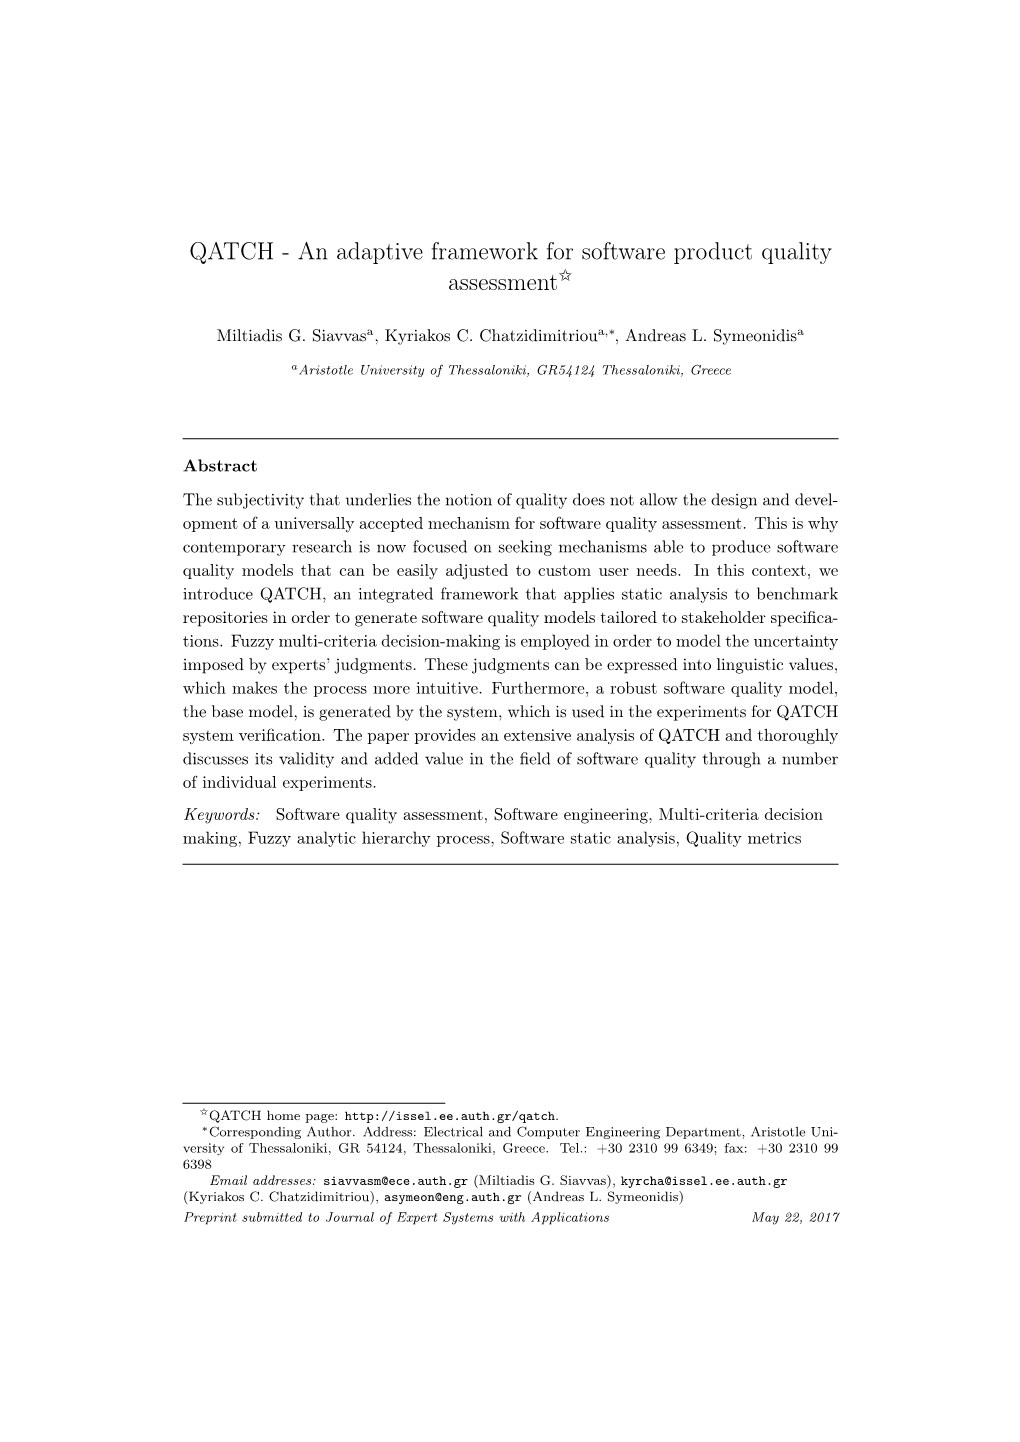 QATCH - an Adaptive Framework for Software Product Quality Assessment$